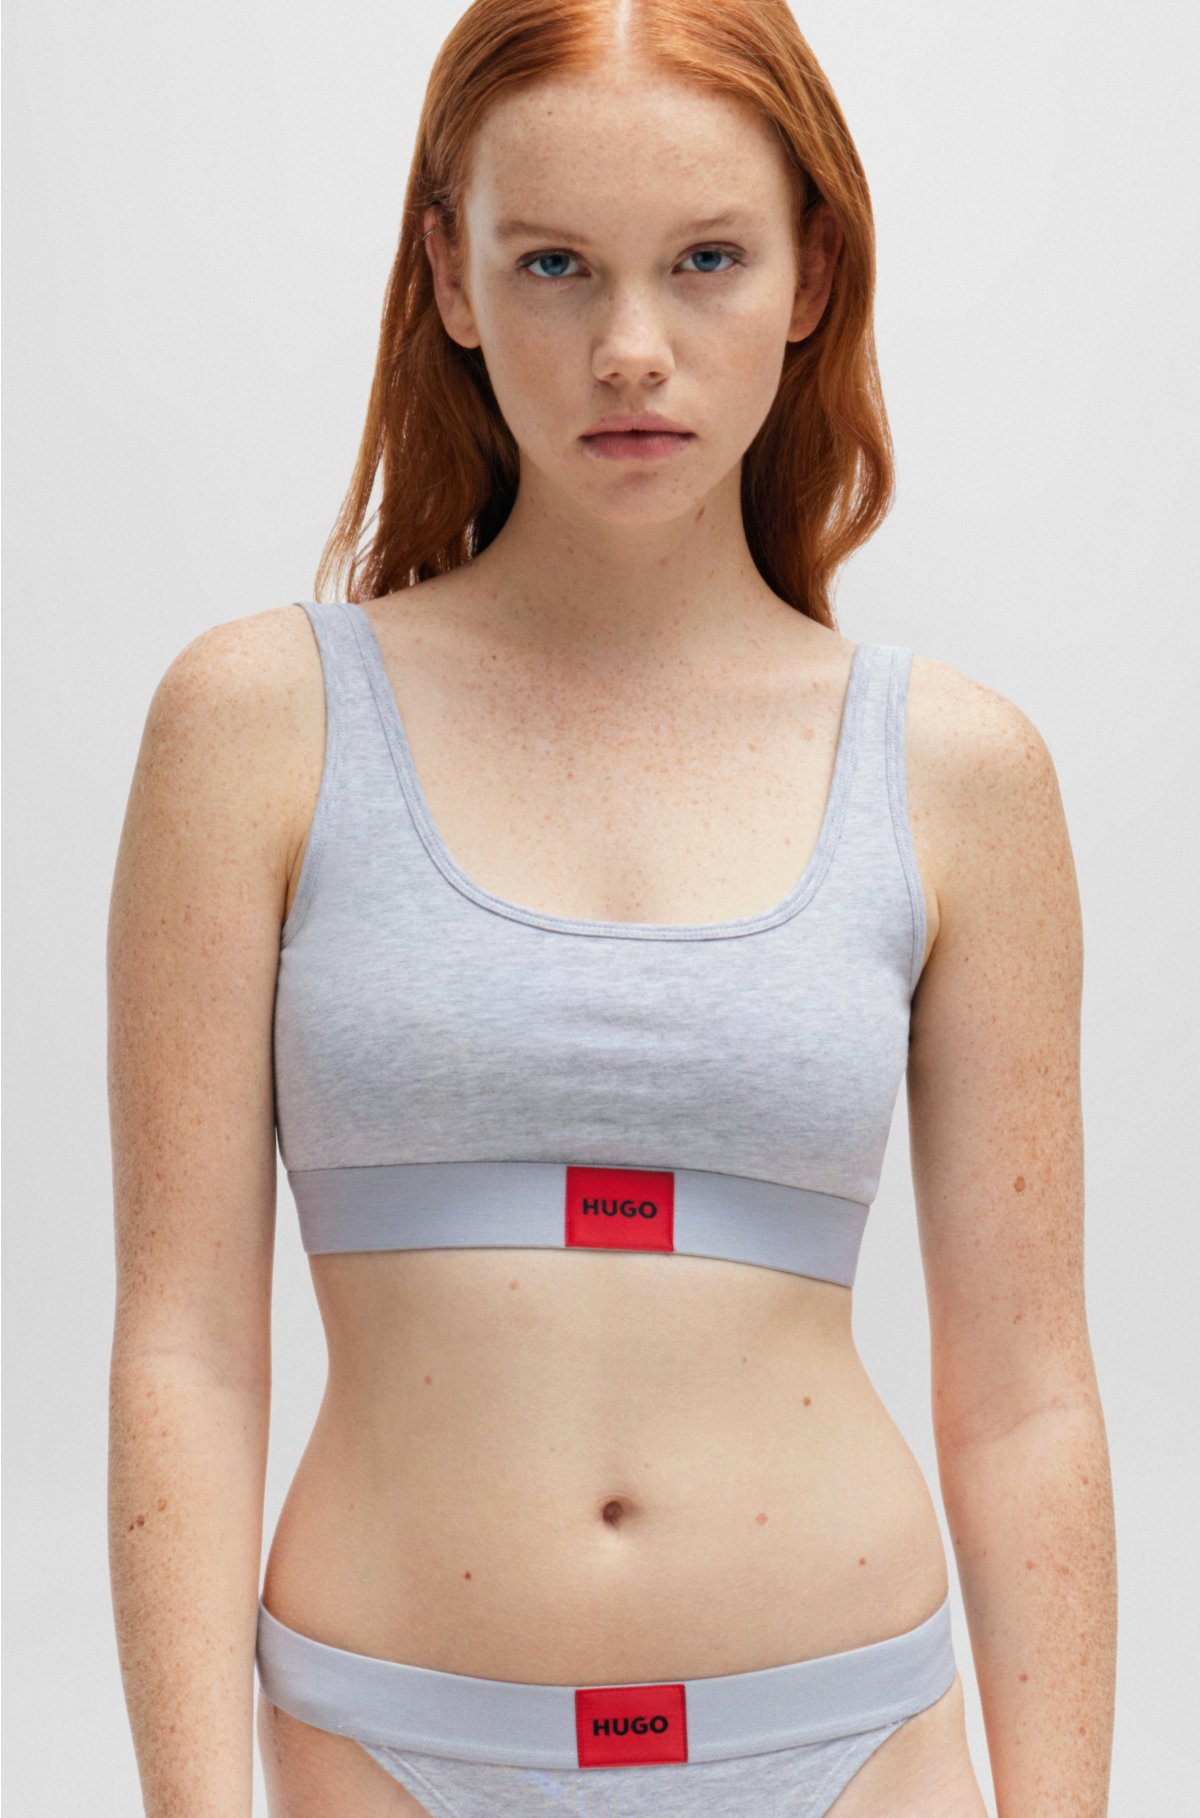 logo - Stretch-cotton HUGO red bralette label with